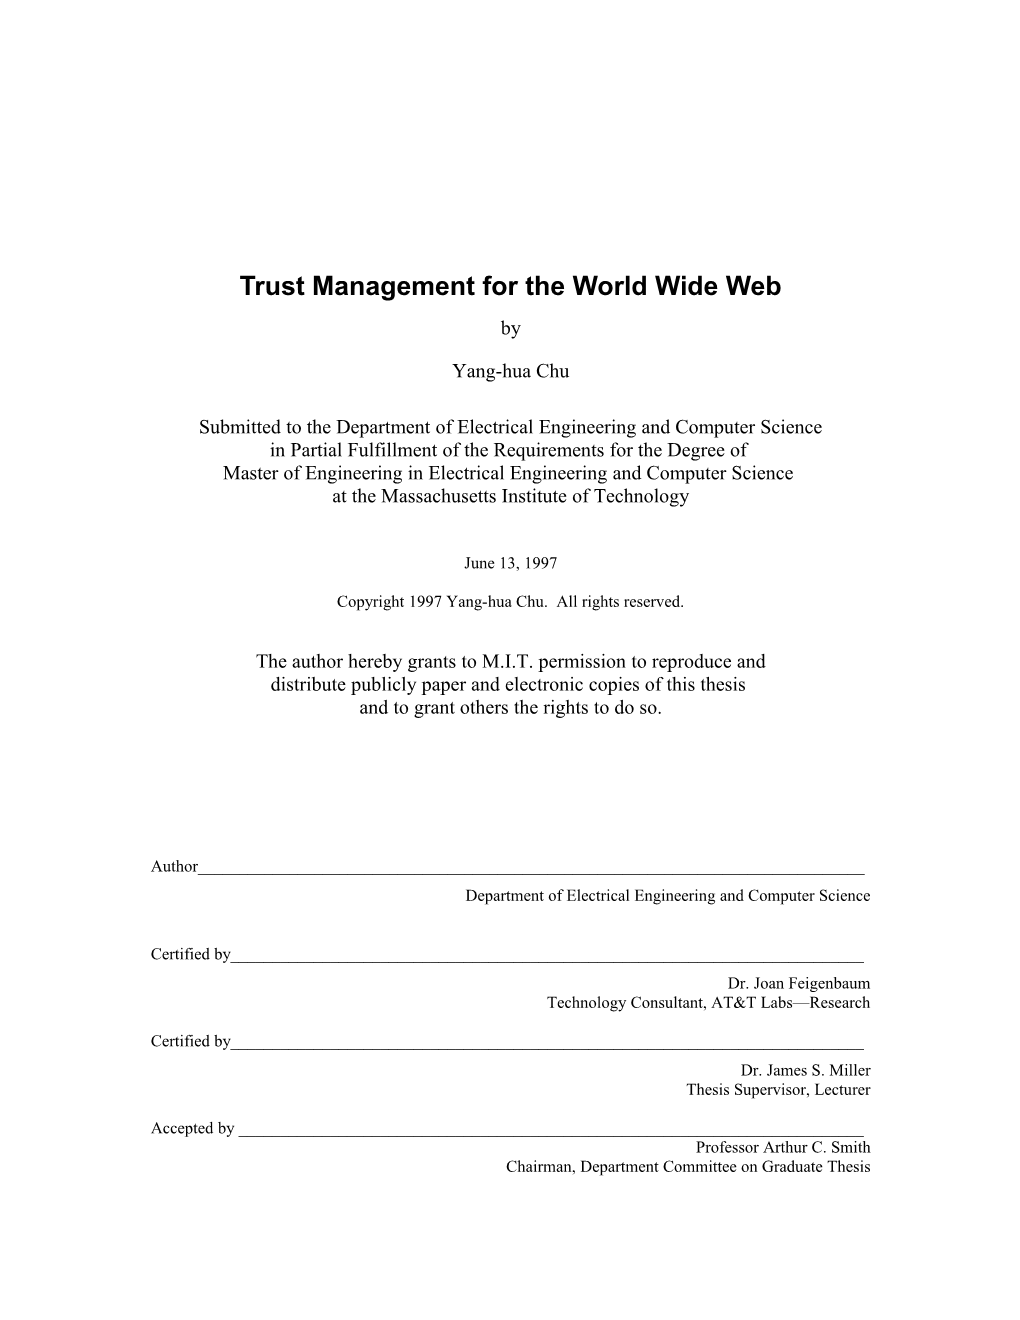 Trust Management for the World Wide Web